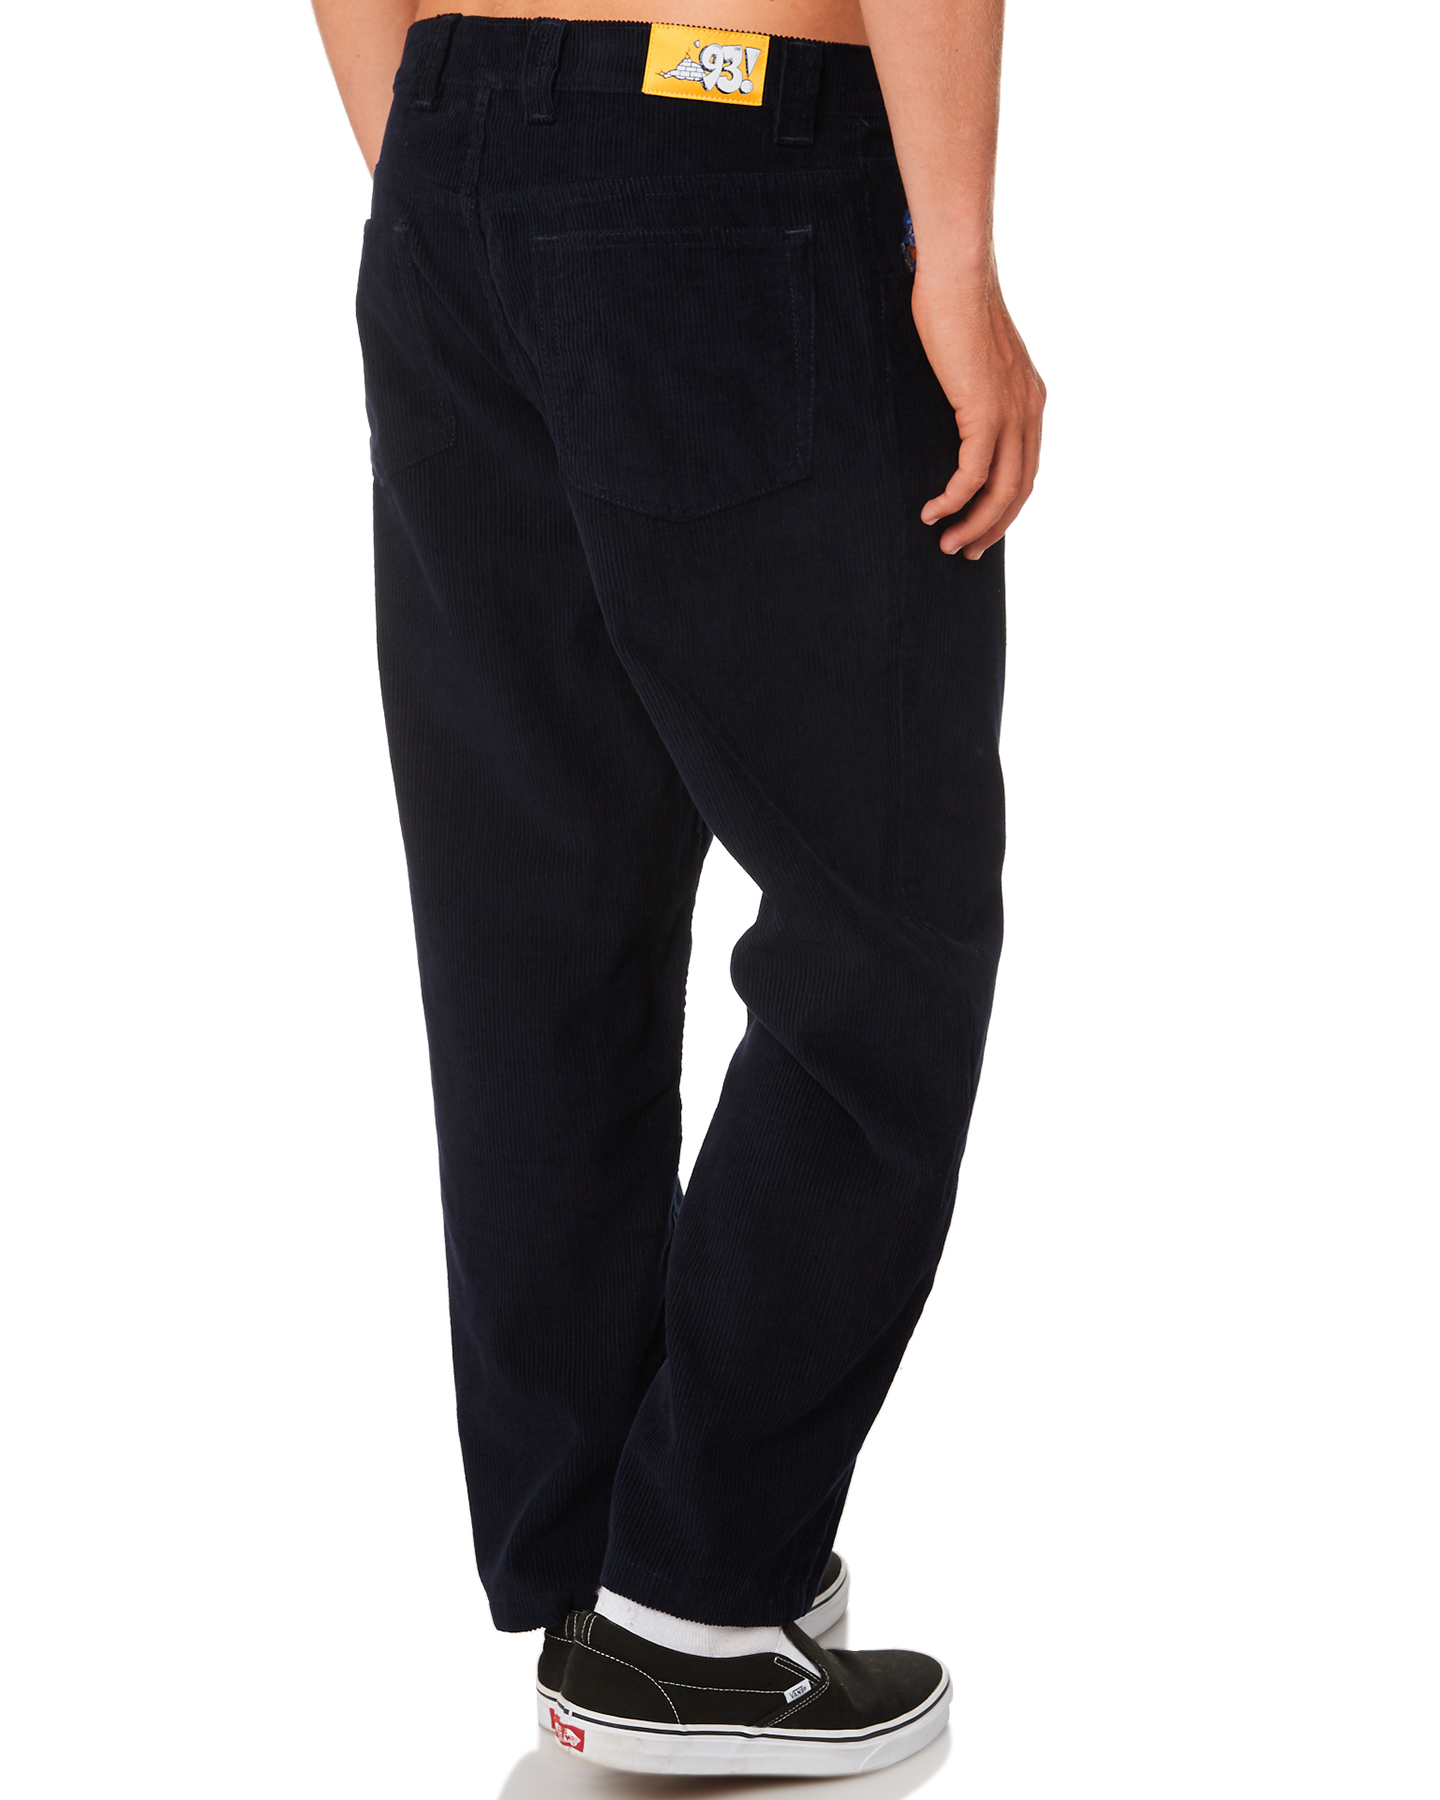 New Polar Skate Co. Men's 93 Mens Cords Pant Cotton Fitted Corduroy